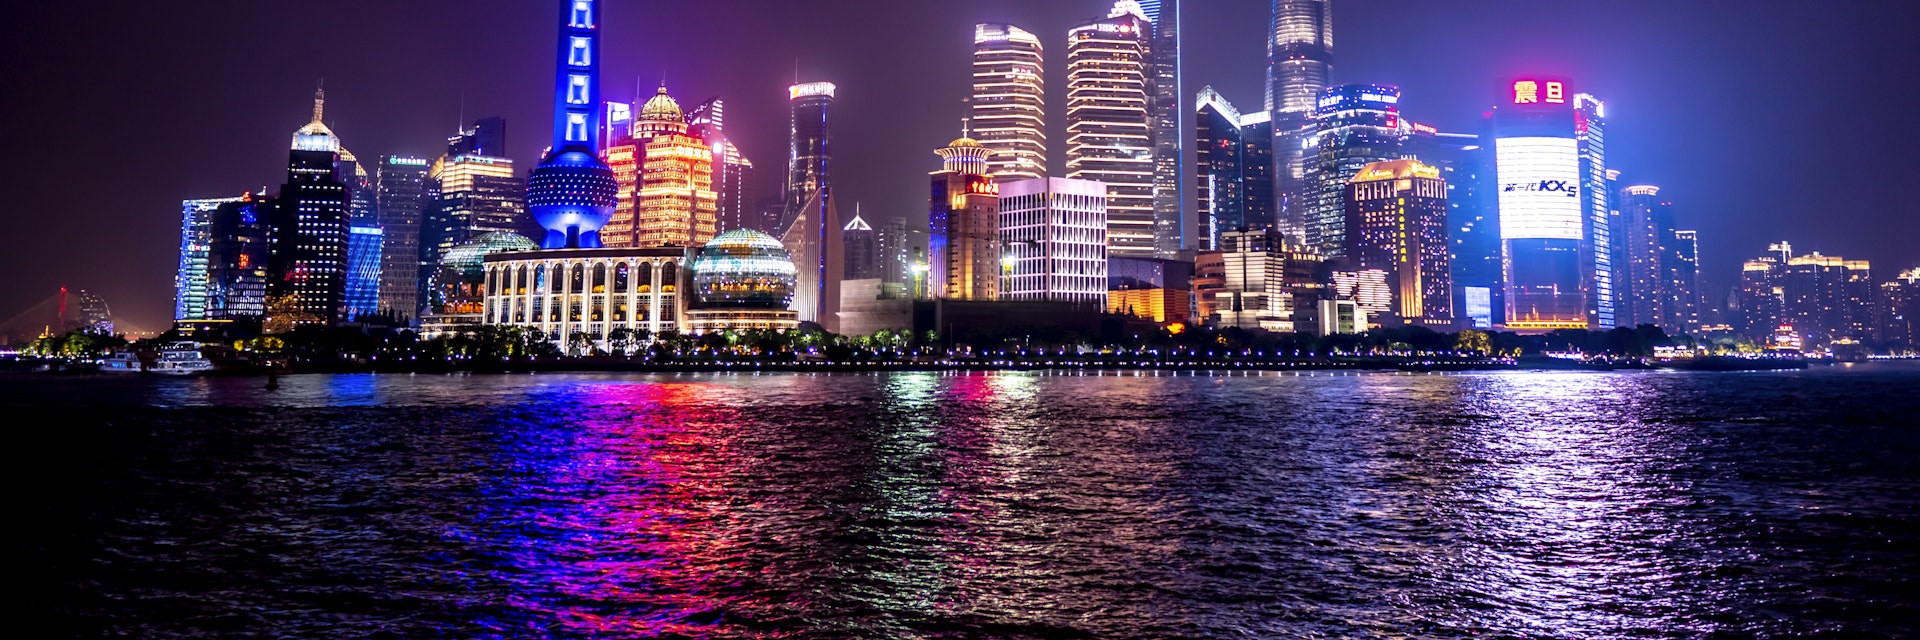 Skyline night view from Bund waterfront on Pudong New Area, Shanghai.
